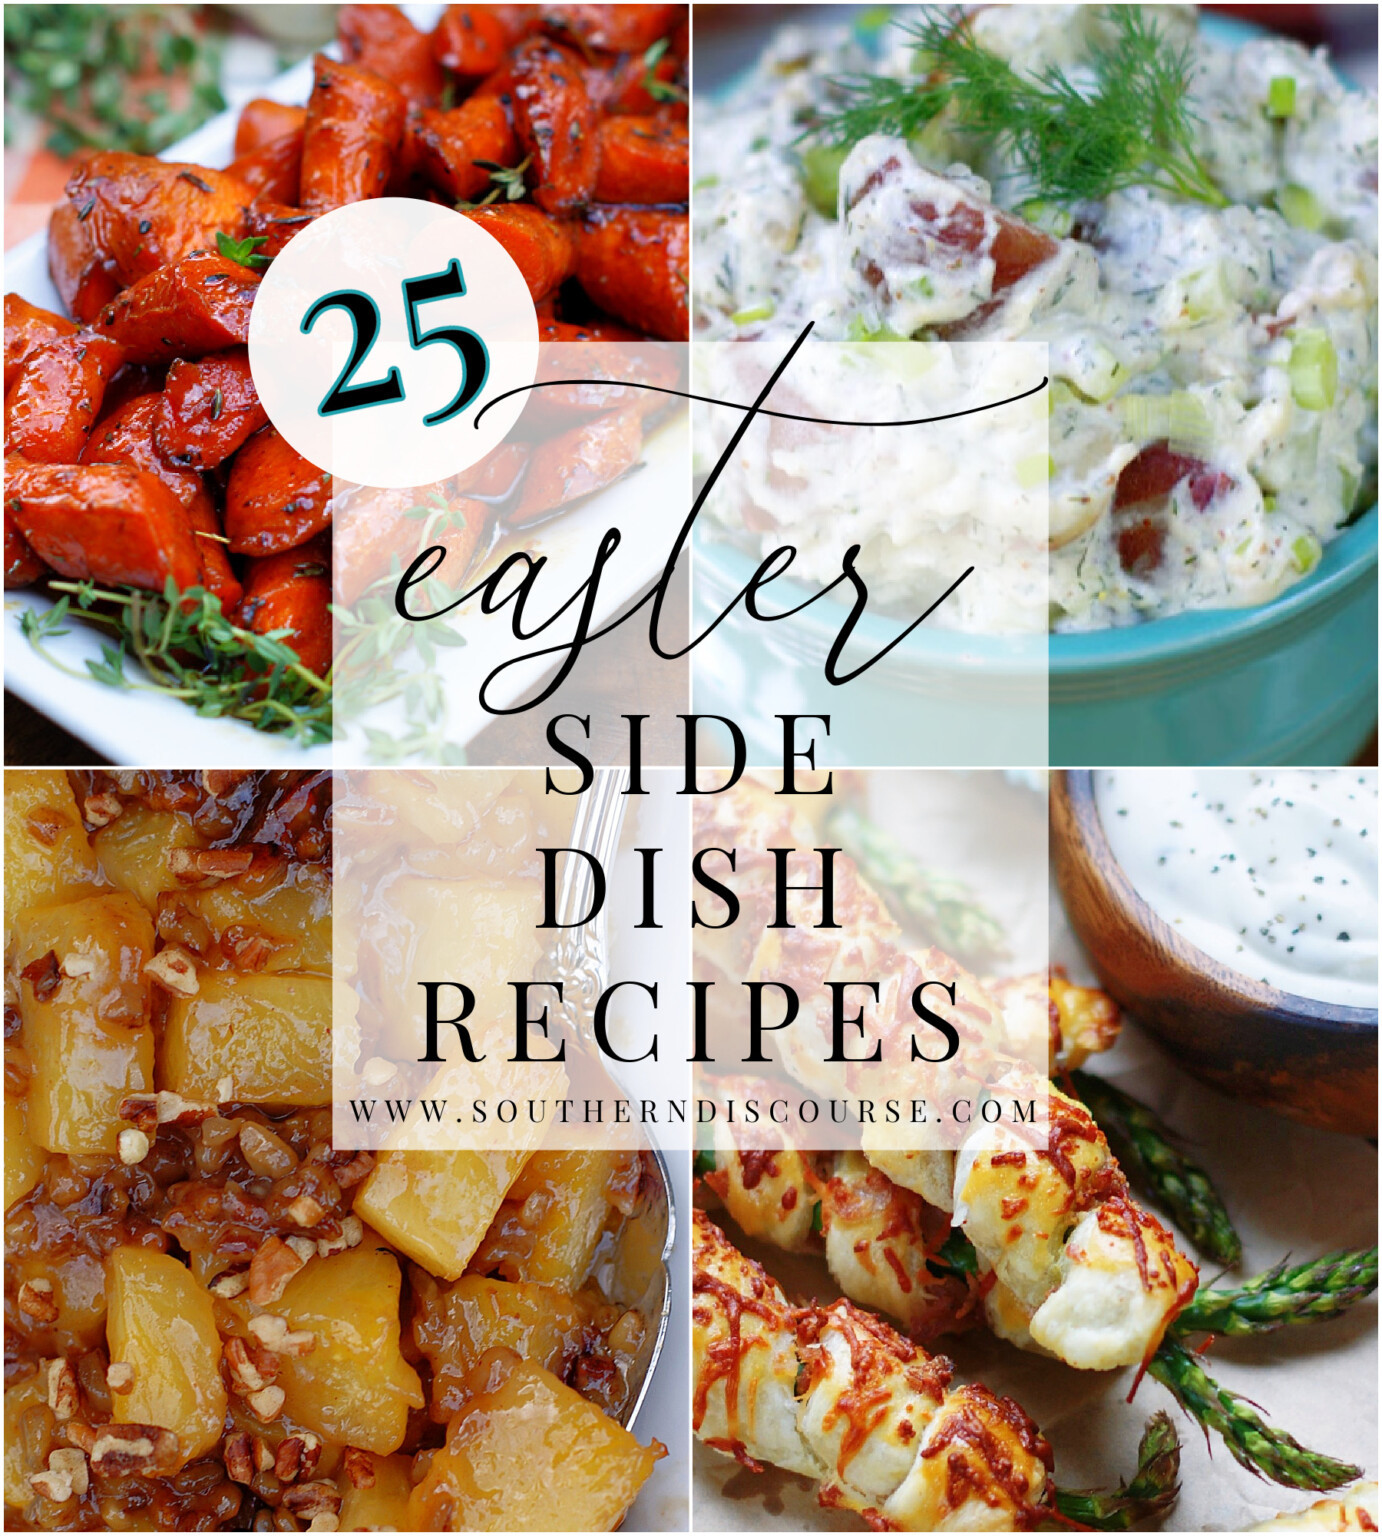 Easter Side Dishes Pinterest
 25 Easter Side Dish Recipes southern discourse